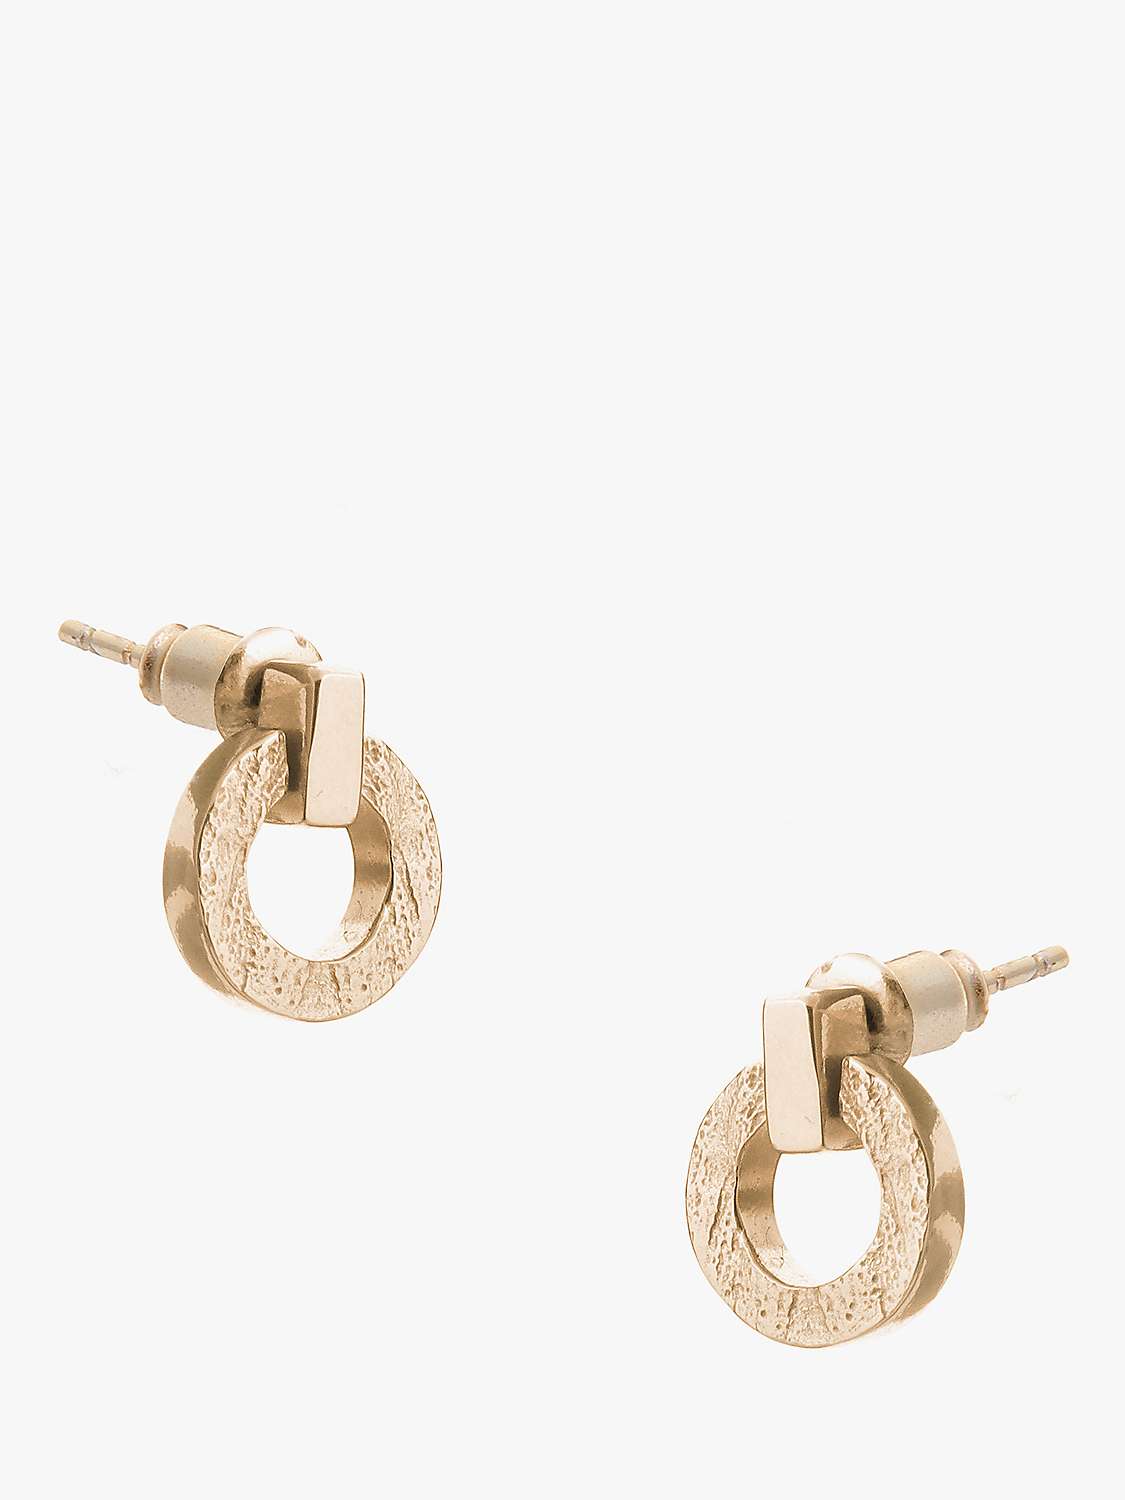 Buy Tutti & Co Palm Collection Textured Circle Stud Earrings Online at johnlewis.com